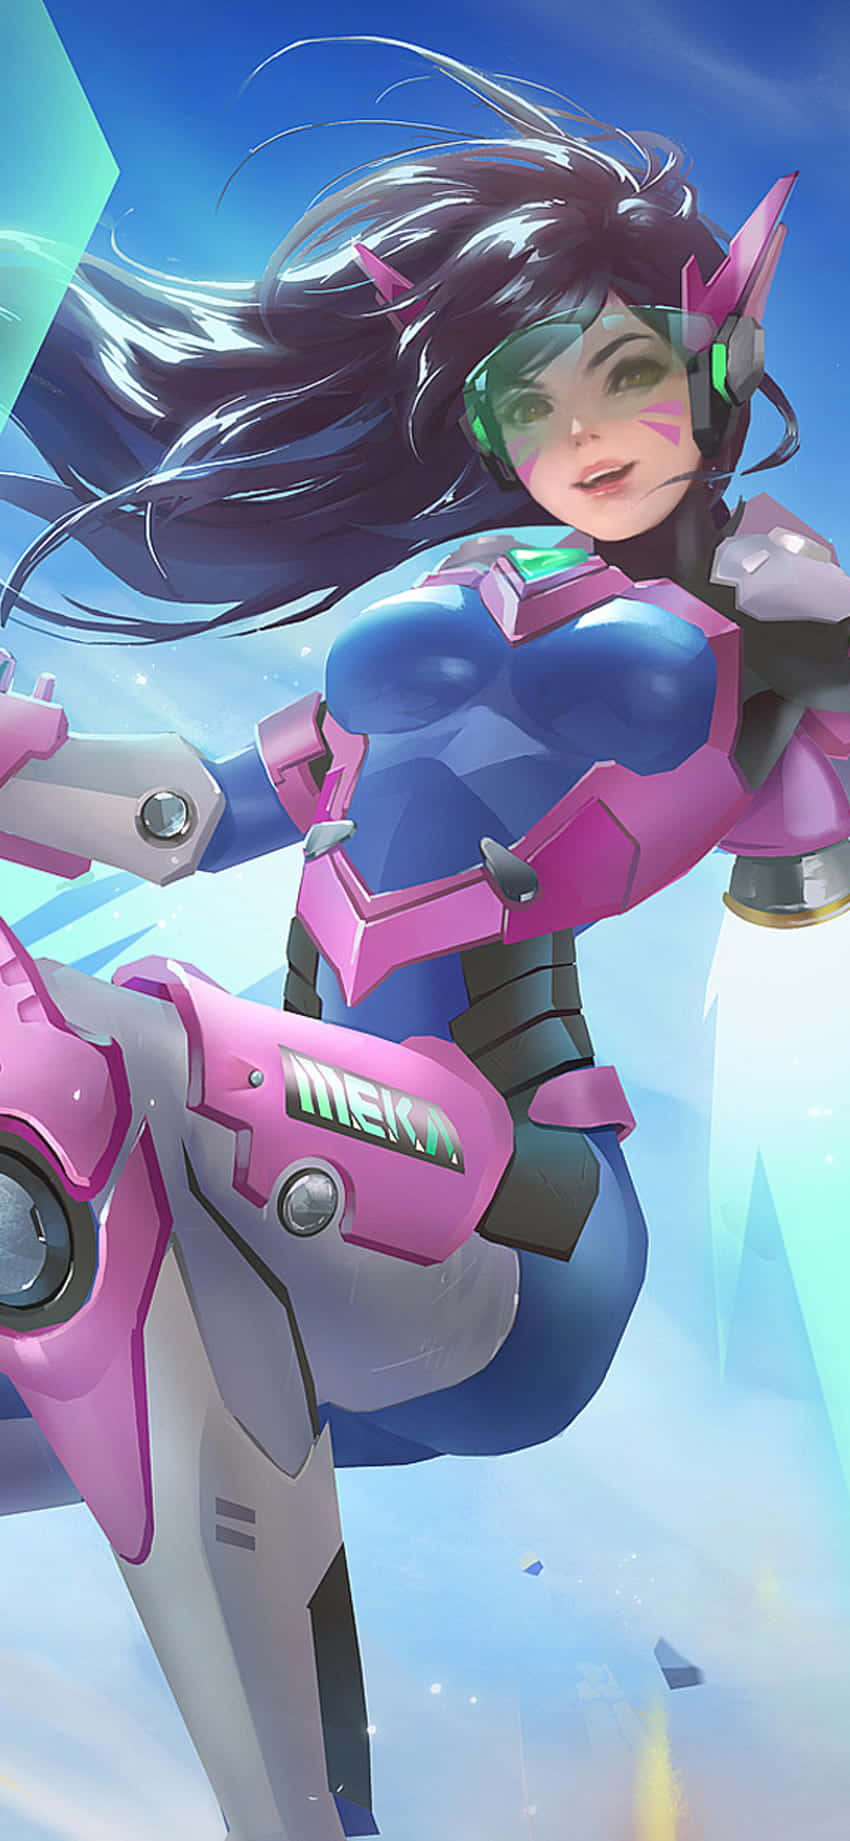 Iphone Xs Max Overwatch Background D.va Floating In The Air Background